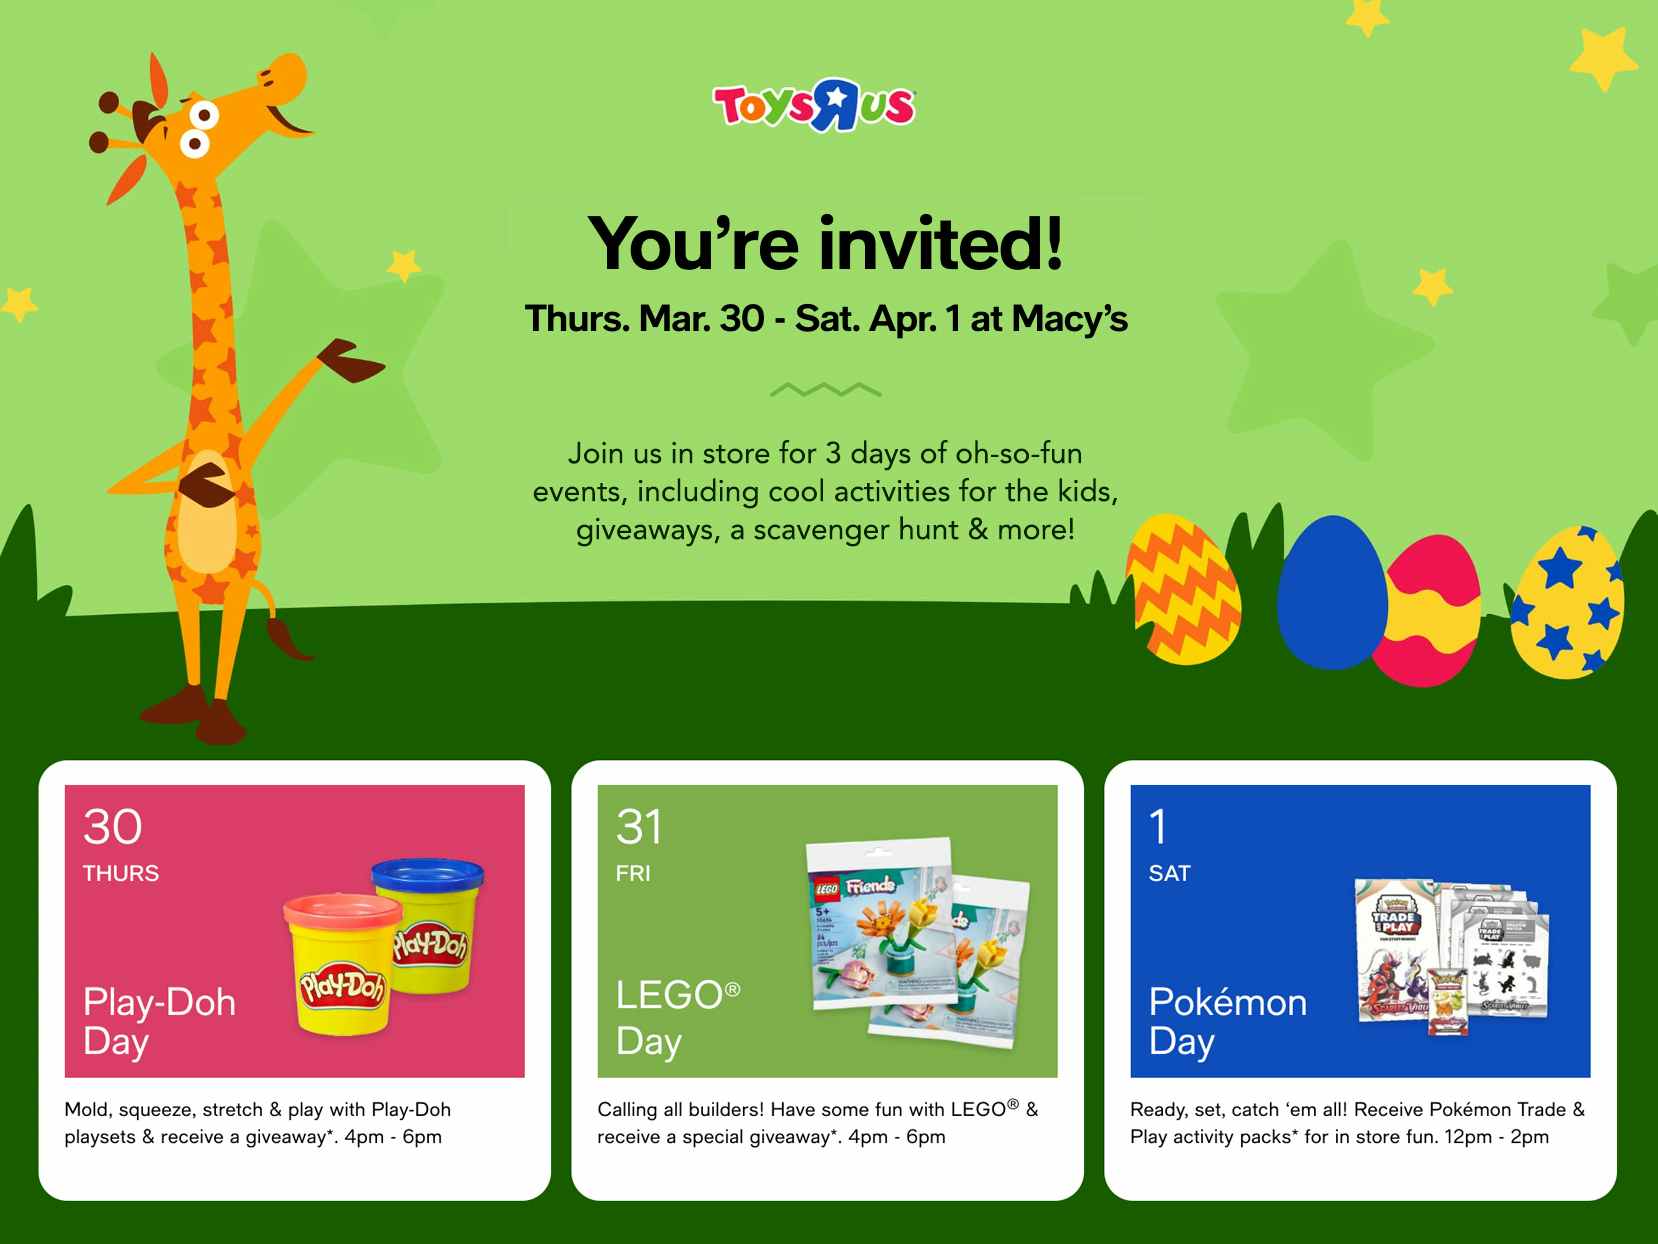 toys r us easter event at macy's dates official promo